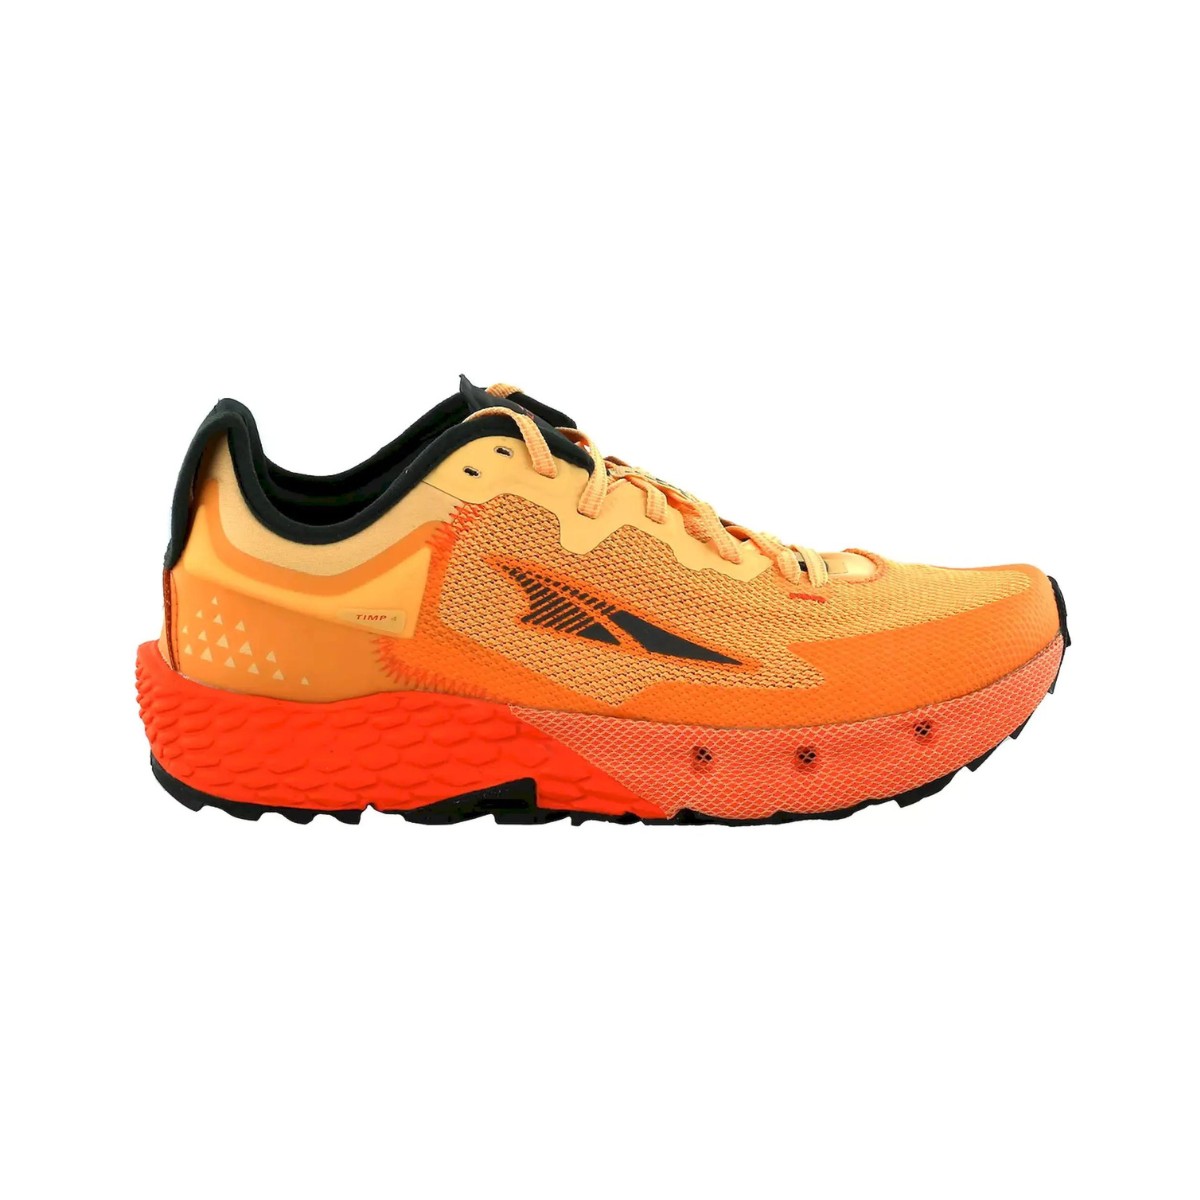 Chaussures Altra Timp 4 Orange AW22, Taille 41 - EUR